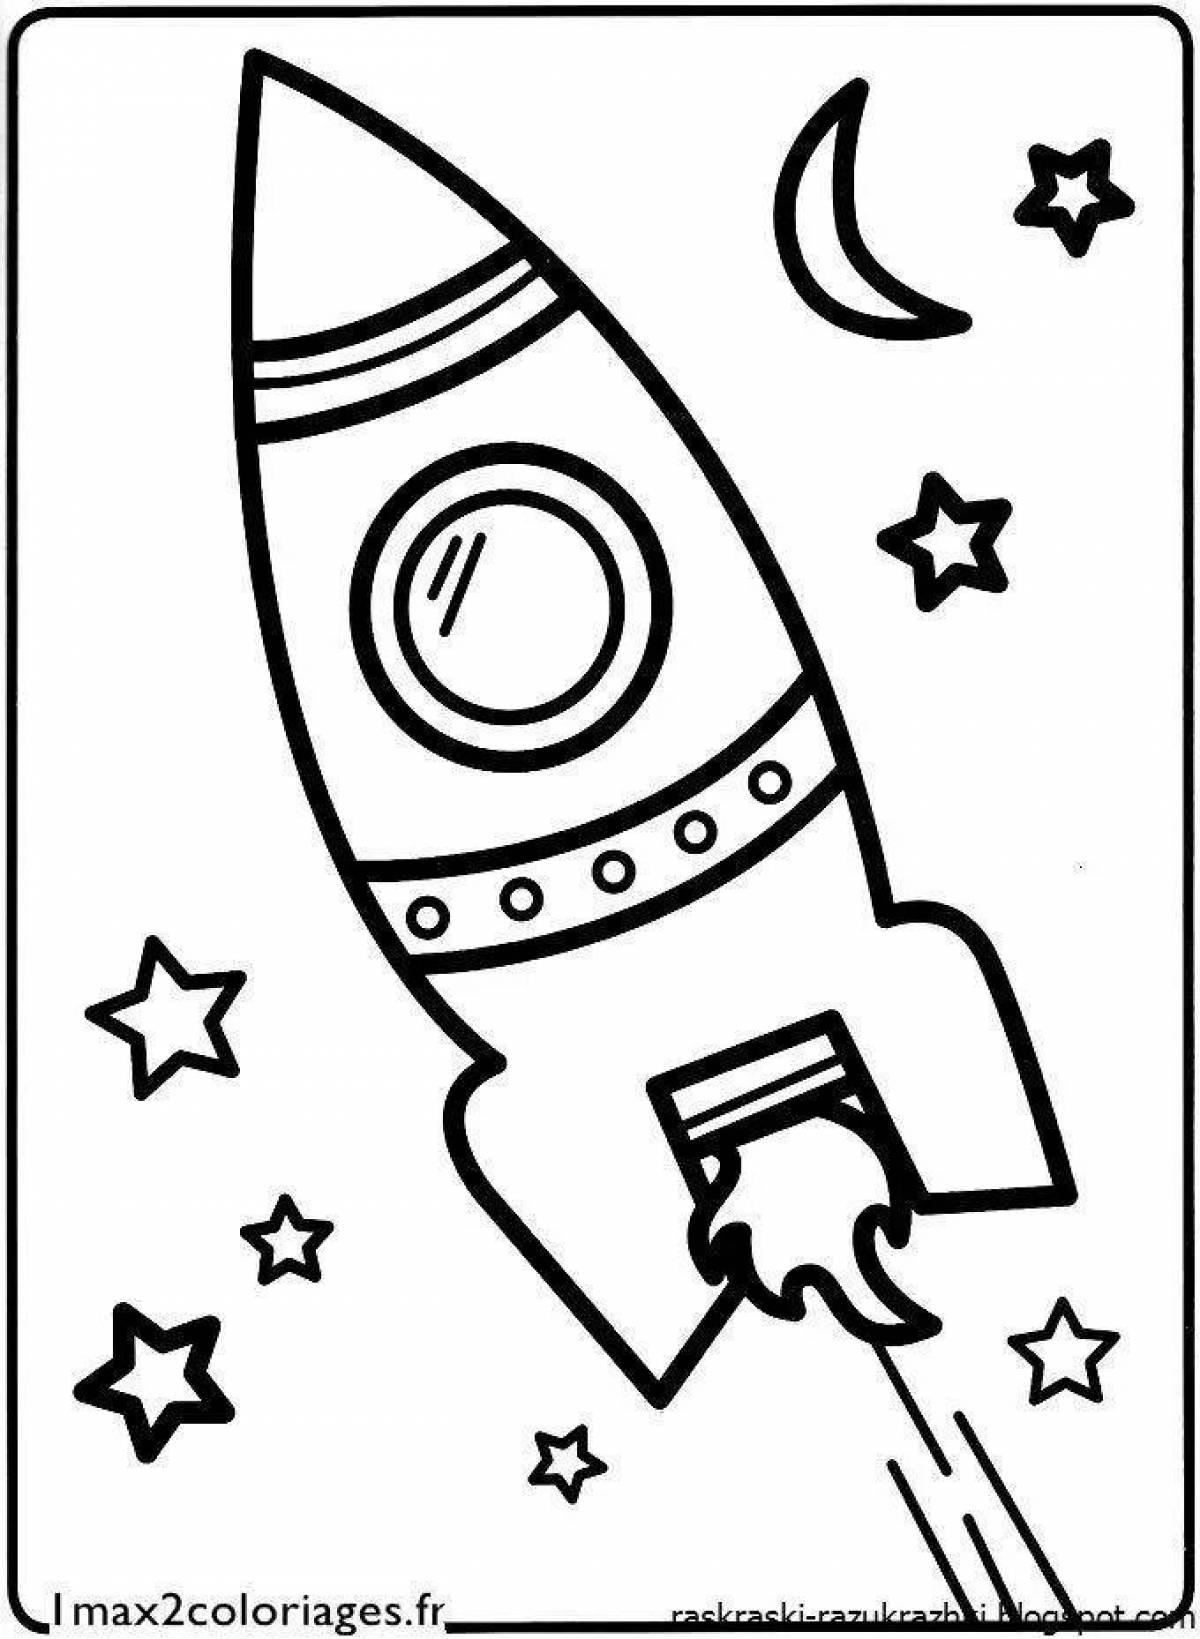 Creative rocket coloring book for kids